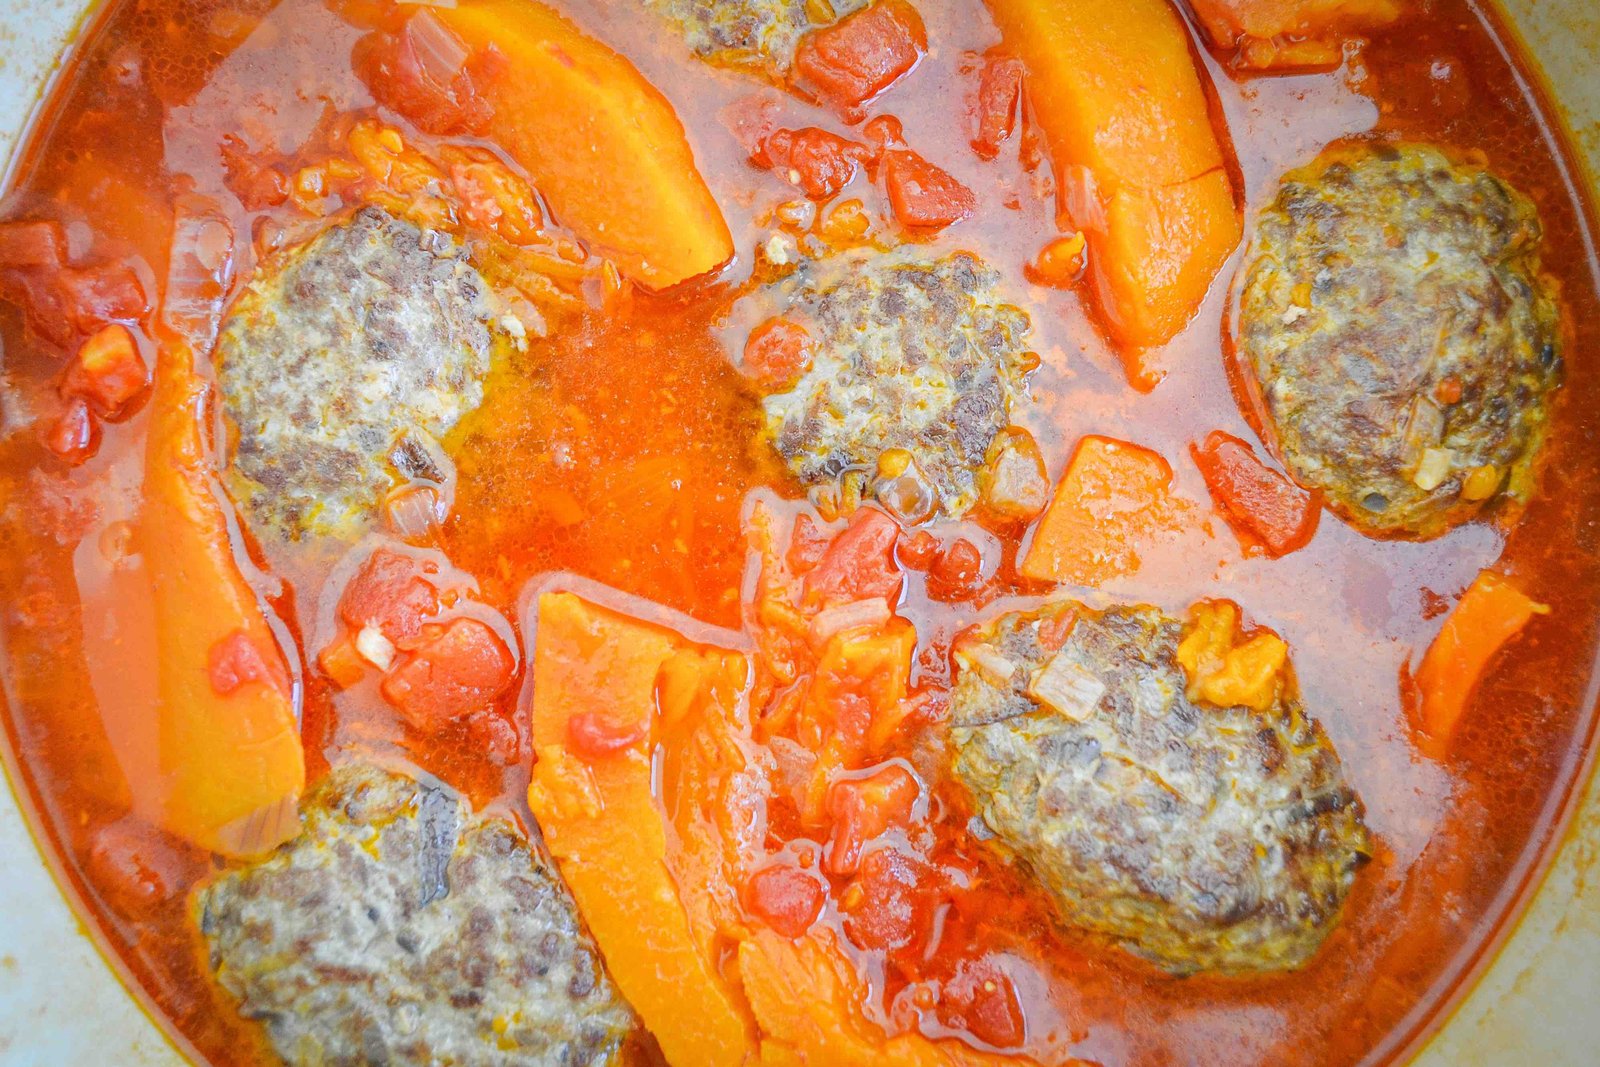 Meatballs in thick tomato sauce with pumpkin